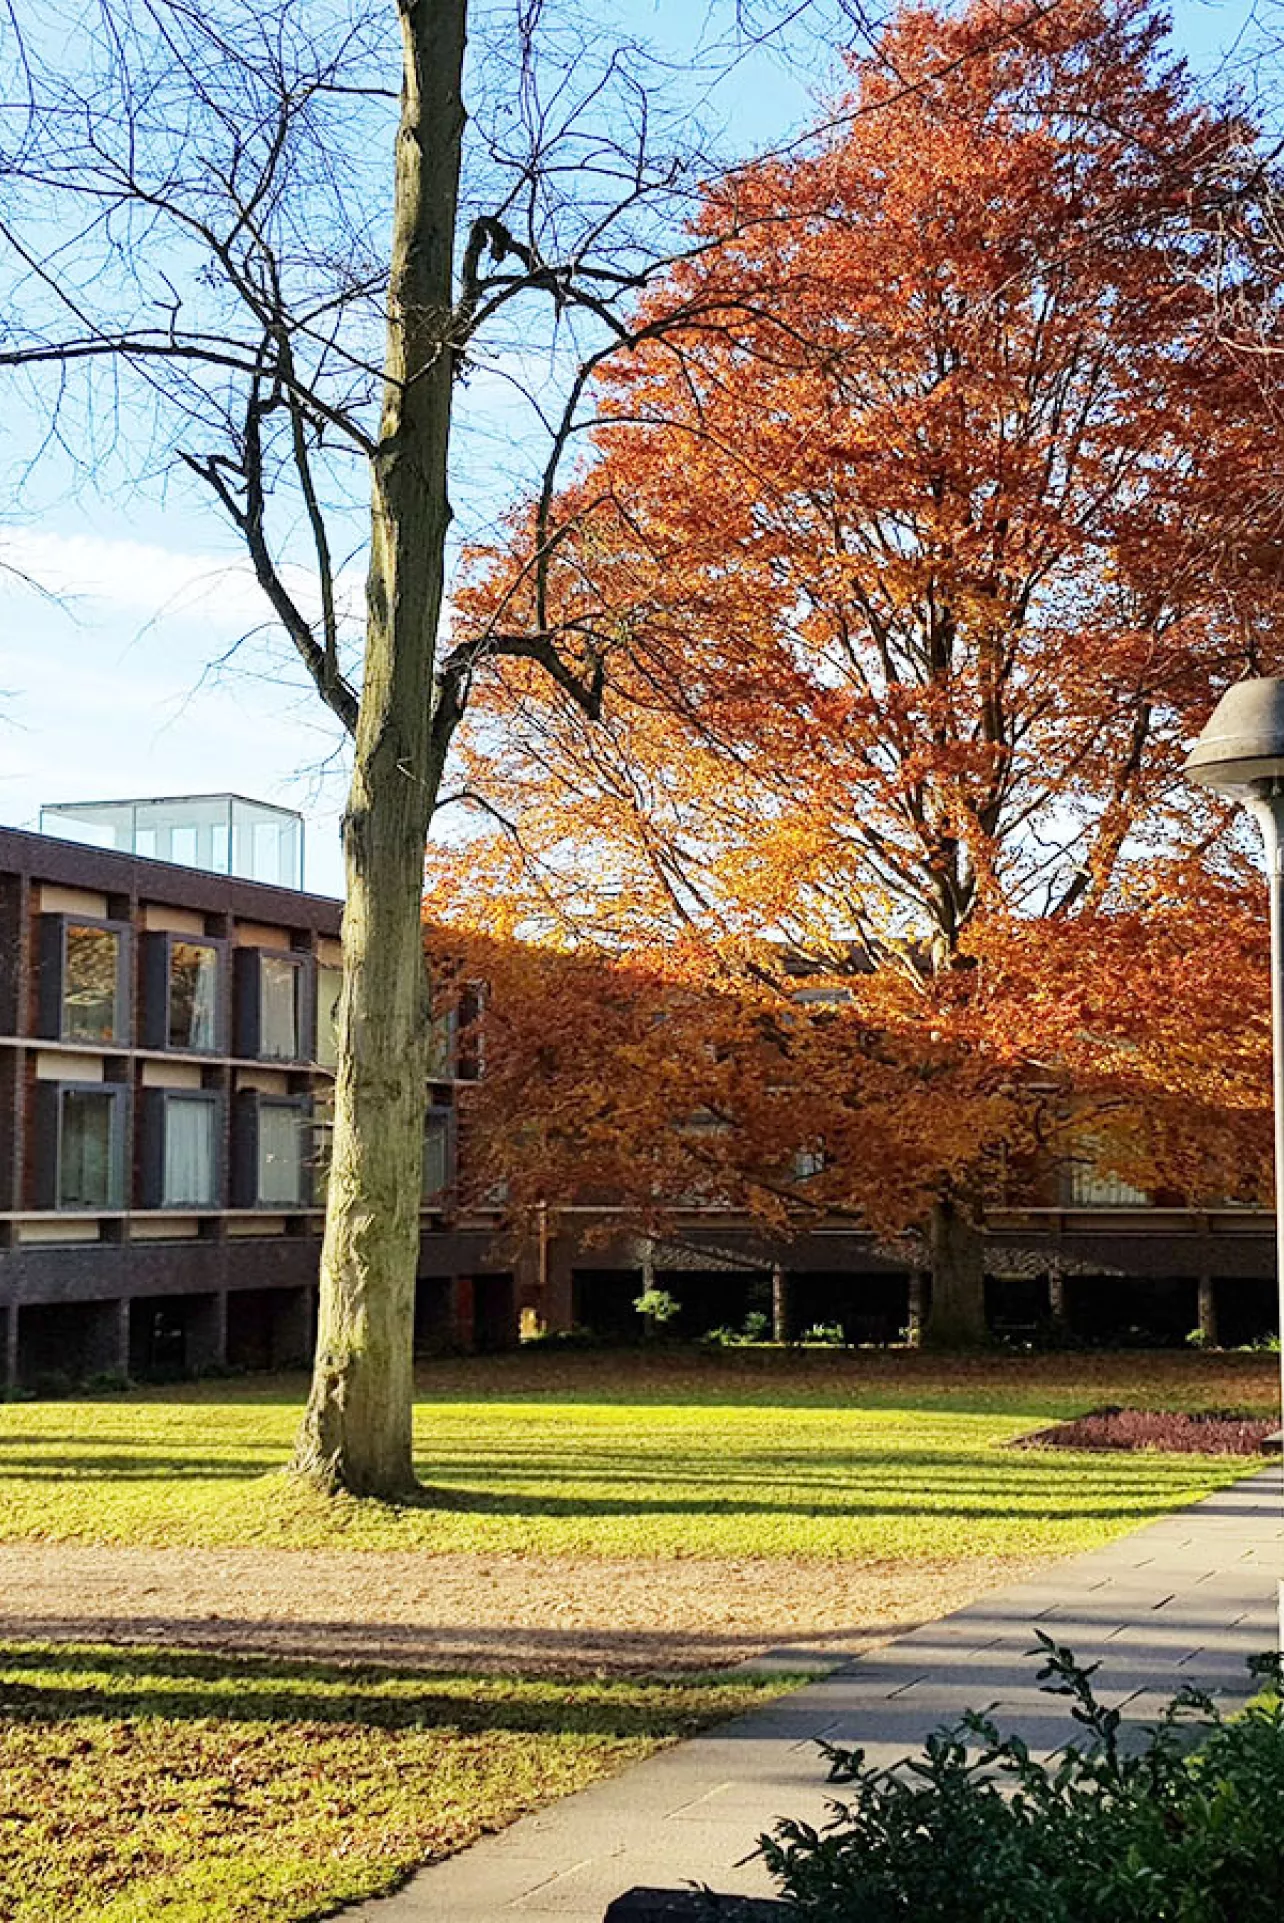 A photo of Gate House, an accommodation building at Fitzwilliam College. The photo is taken in Autumn and the trees around the accomodation are either bare or covered with red/orange leaves